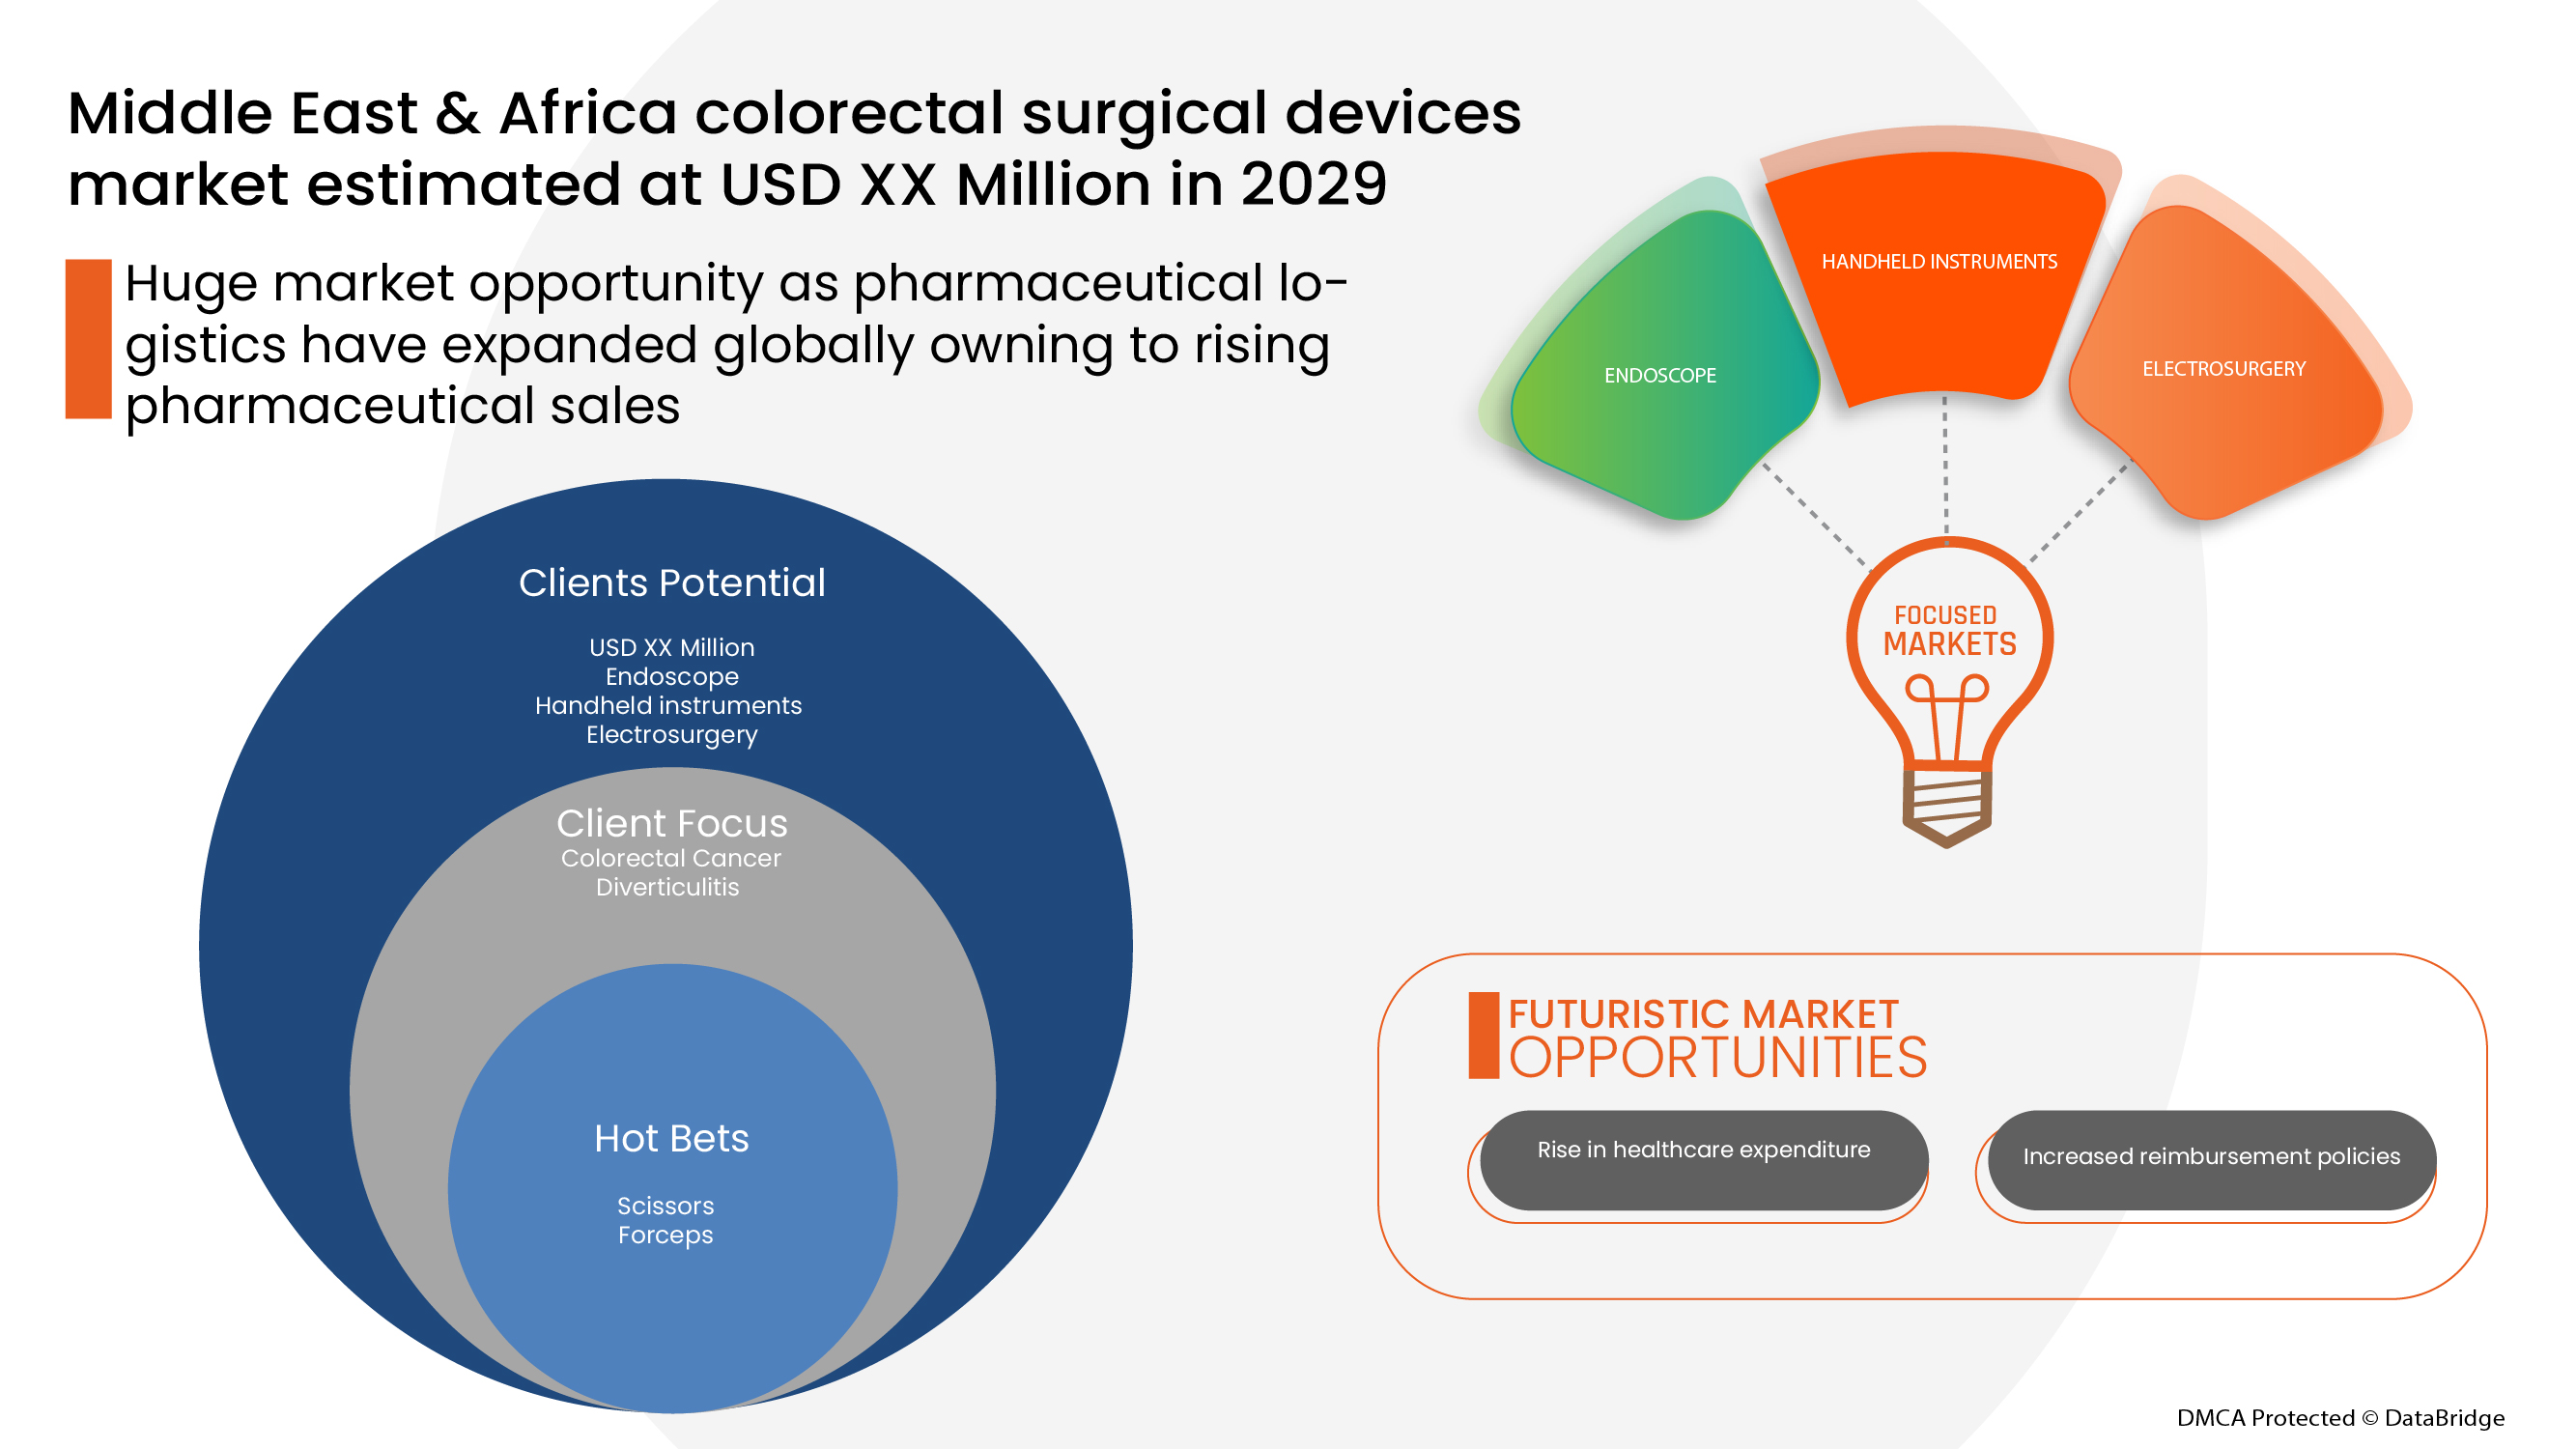 Middle East and Africa Colorectal Surgical Devices Market